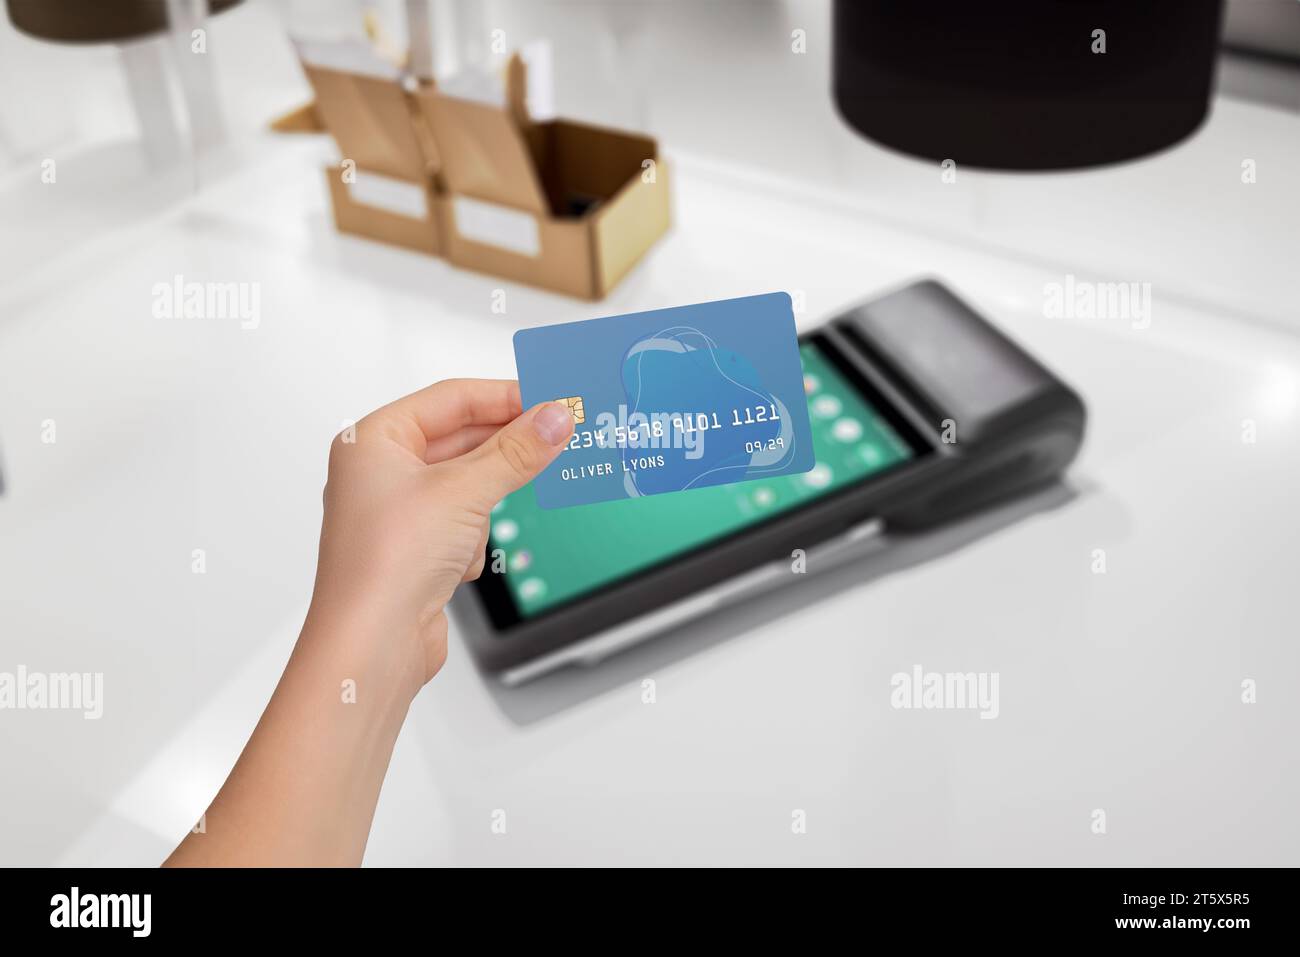 Secure card payment at sleek POS terminal. Hand holding credit card for transaction. Safe, convenient payment process Stock Photo